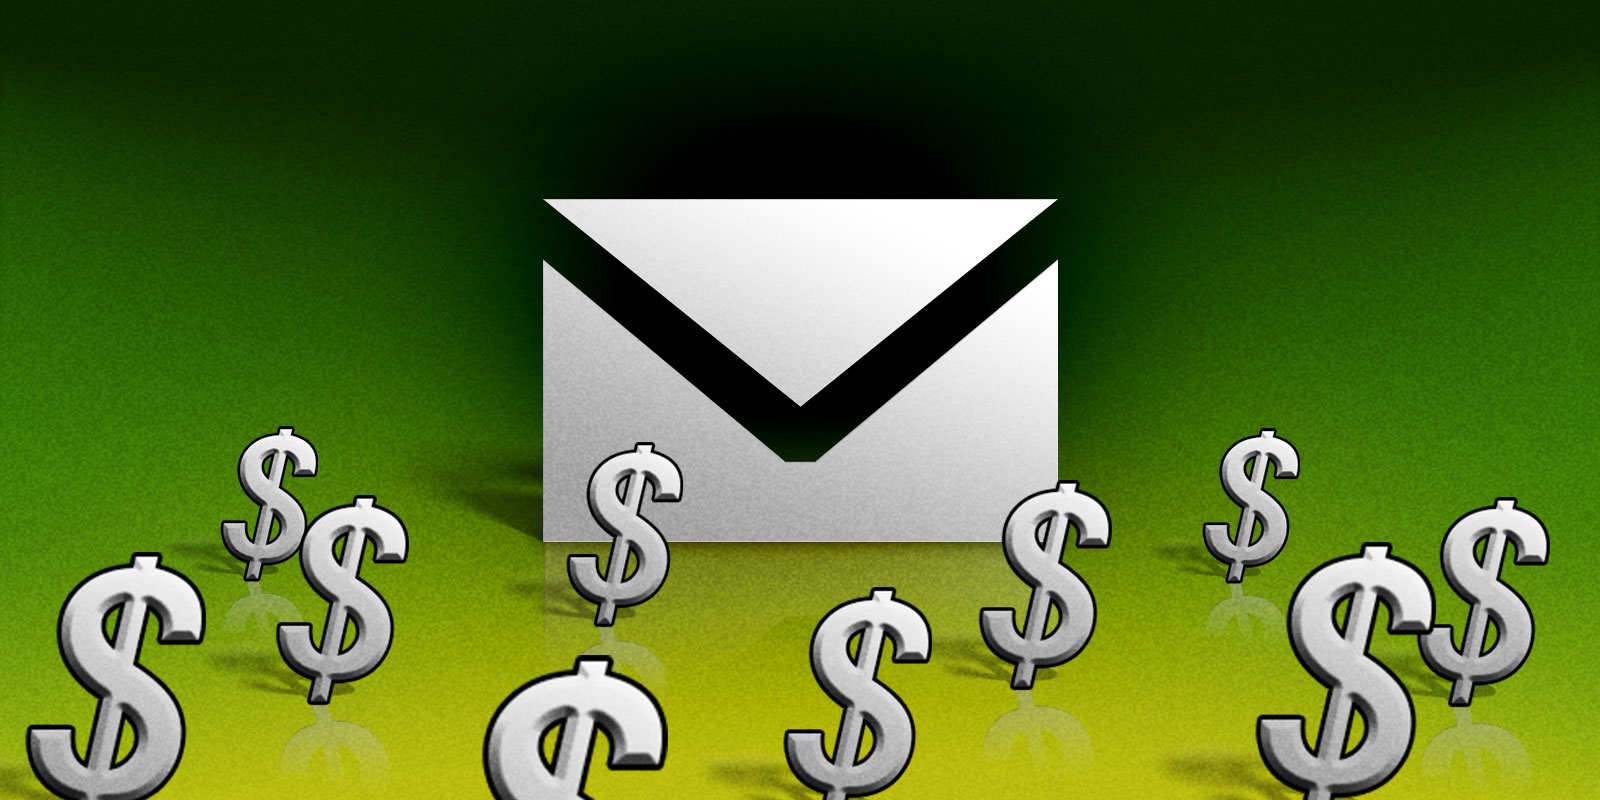 Email Marketing Conversion